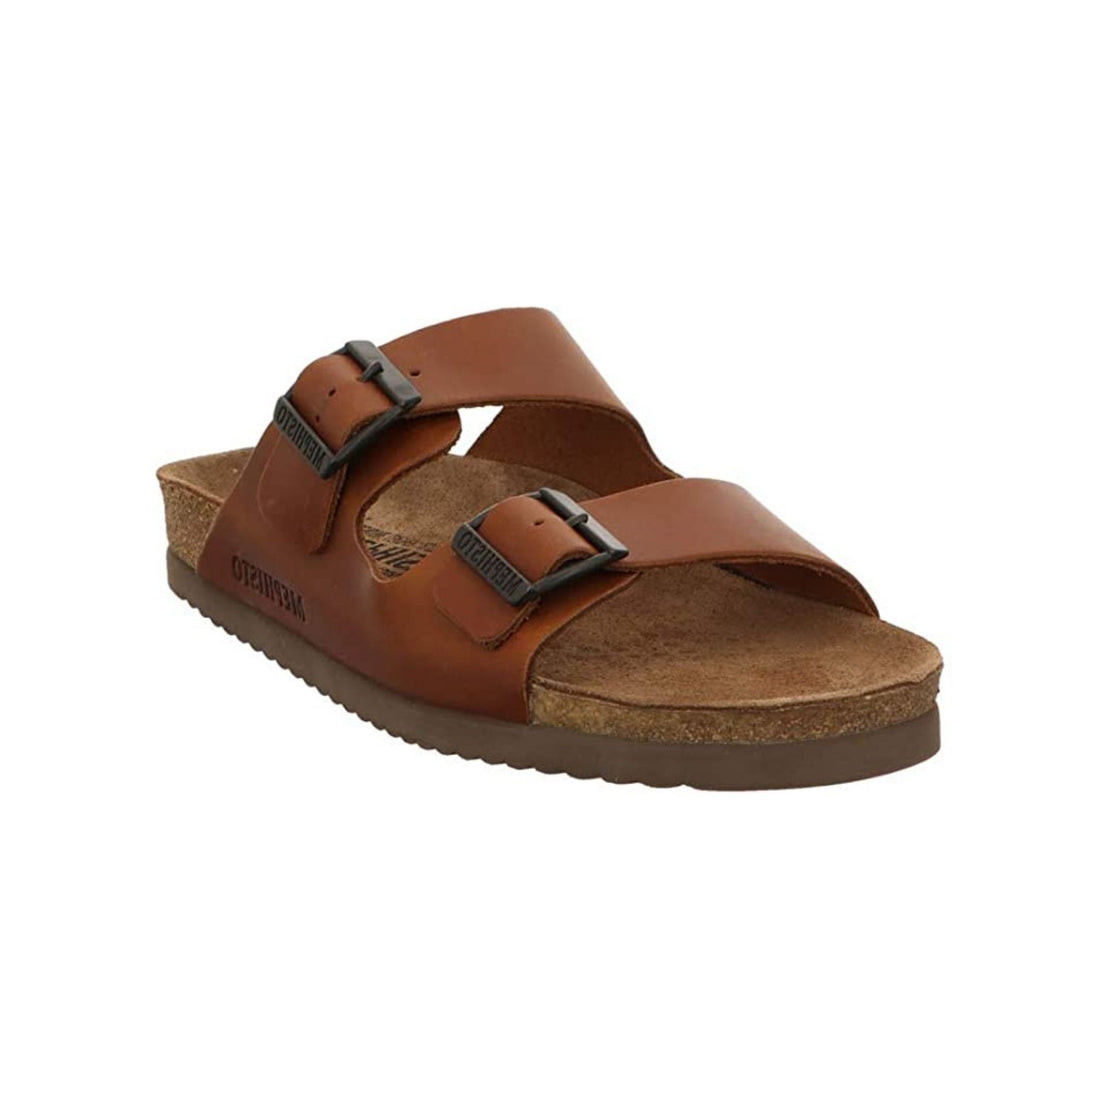 Chestnut brown leather two strap sandal with buckl closures, supportive cork misdole and brown outsole.